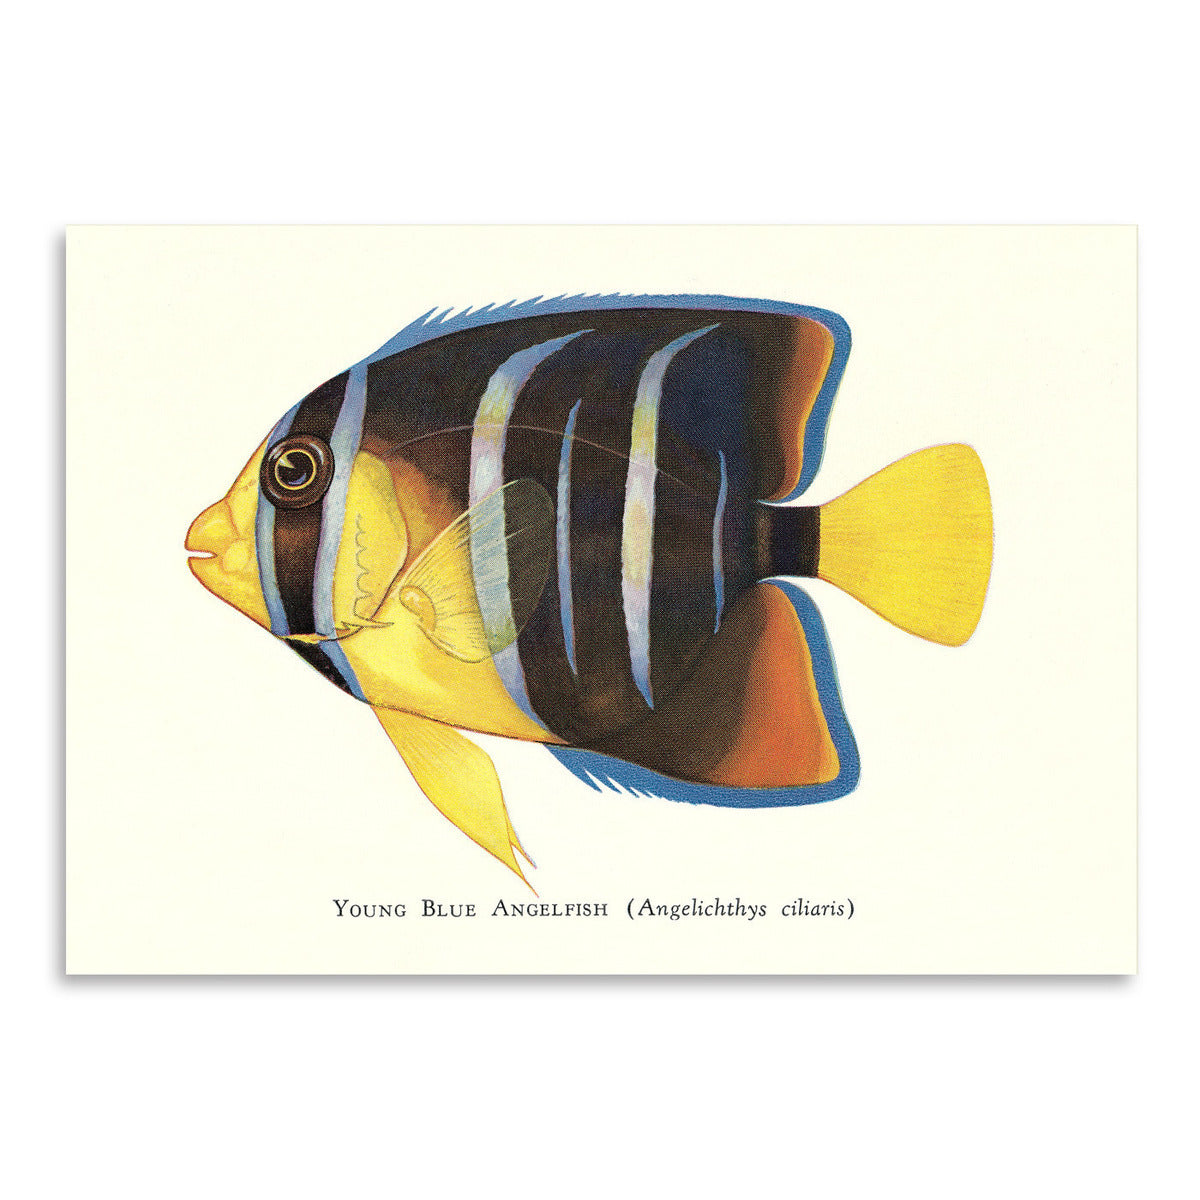 Young Blue Angelfish by Found Image Press Art Print - Art Print - Americanflat